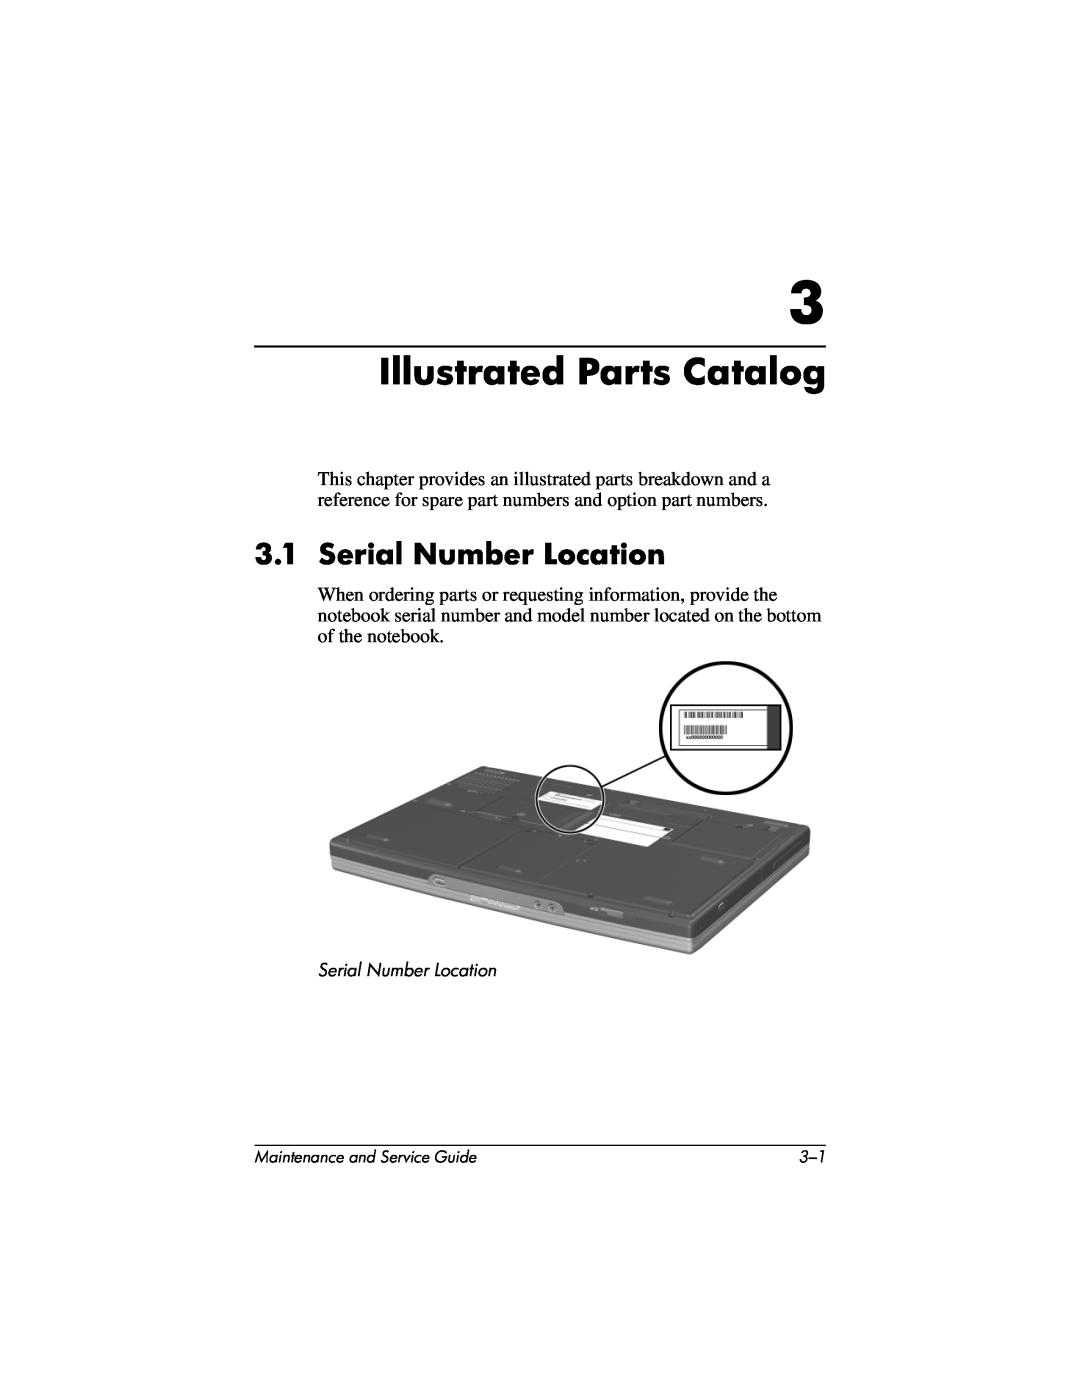 HP nx7000, X1000 manual Illustrated Parts Catalog, Serial Number Location 